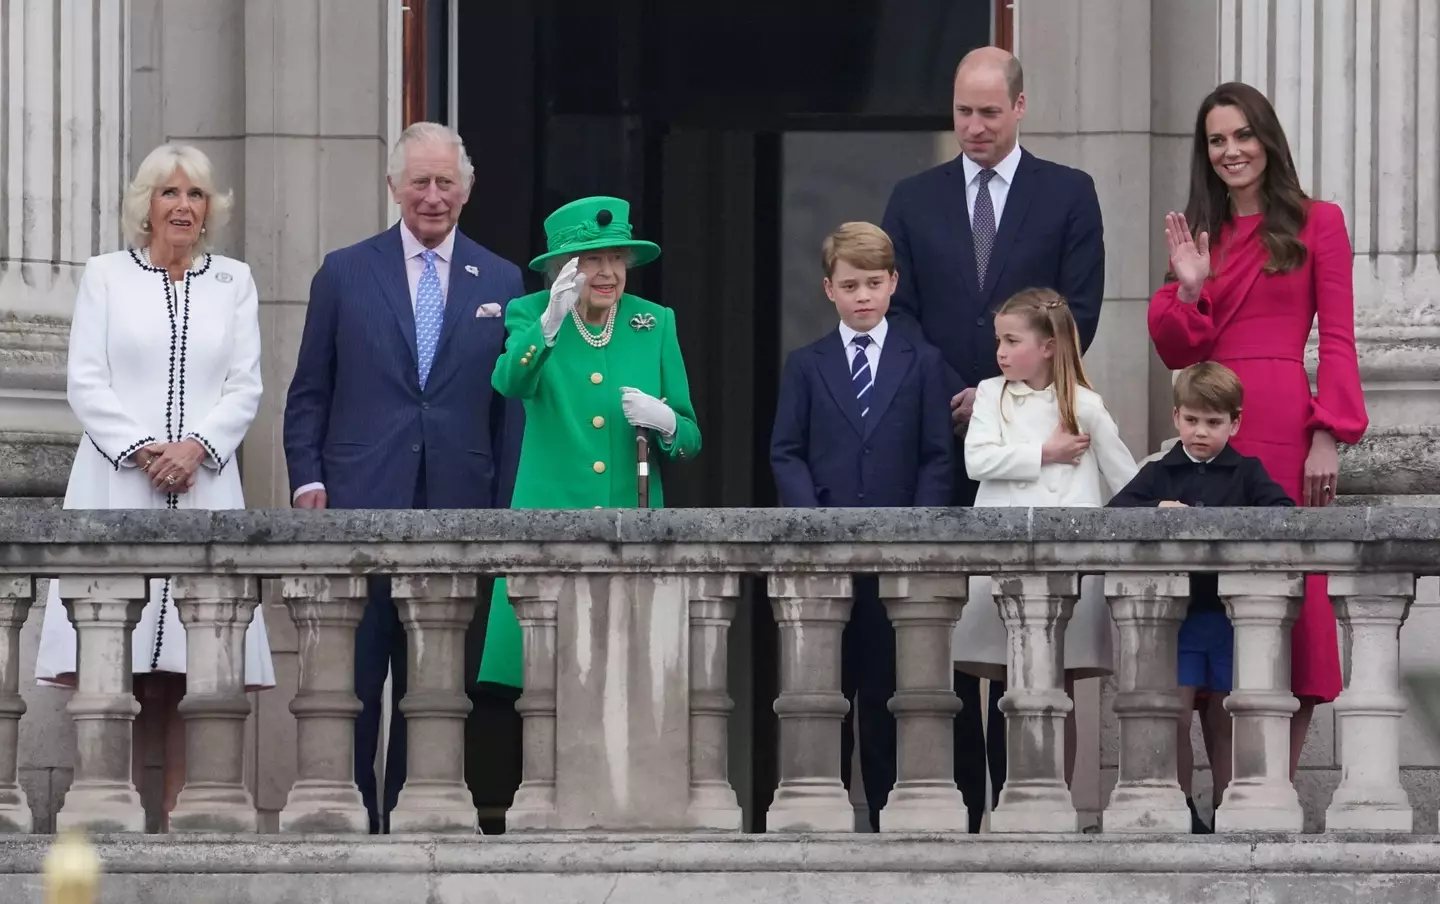 The Queen on the balcony of Buckingham Palace.